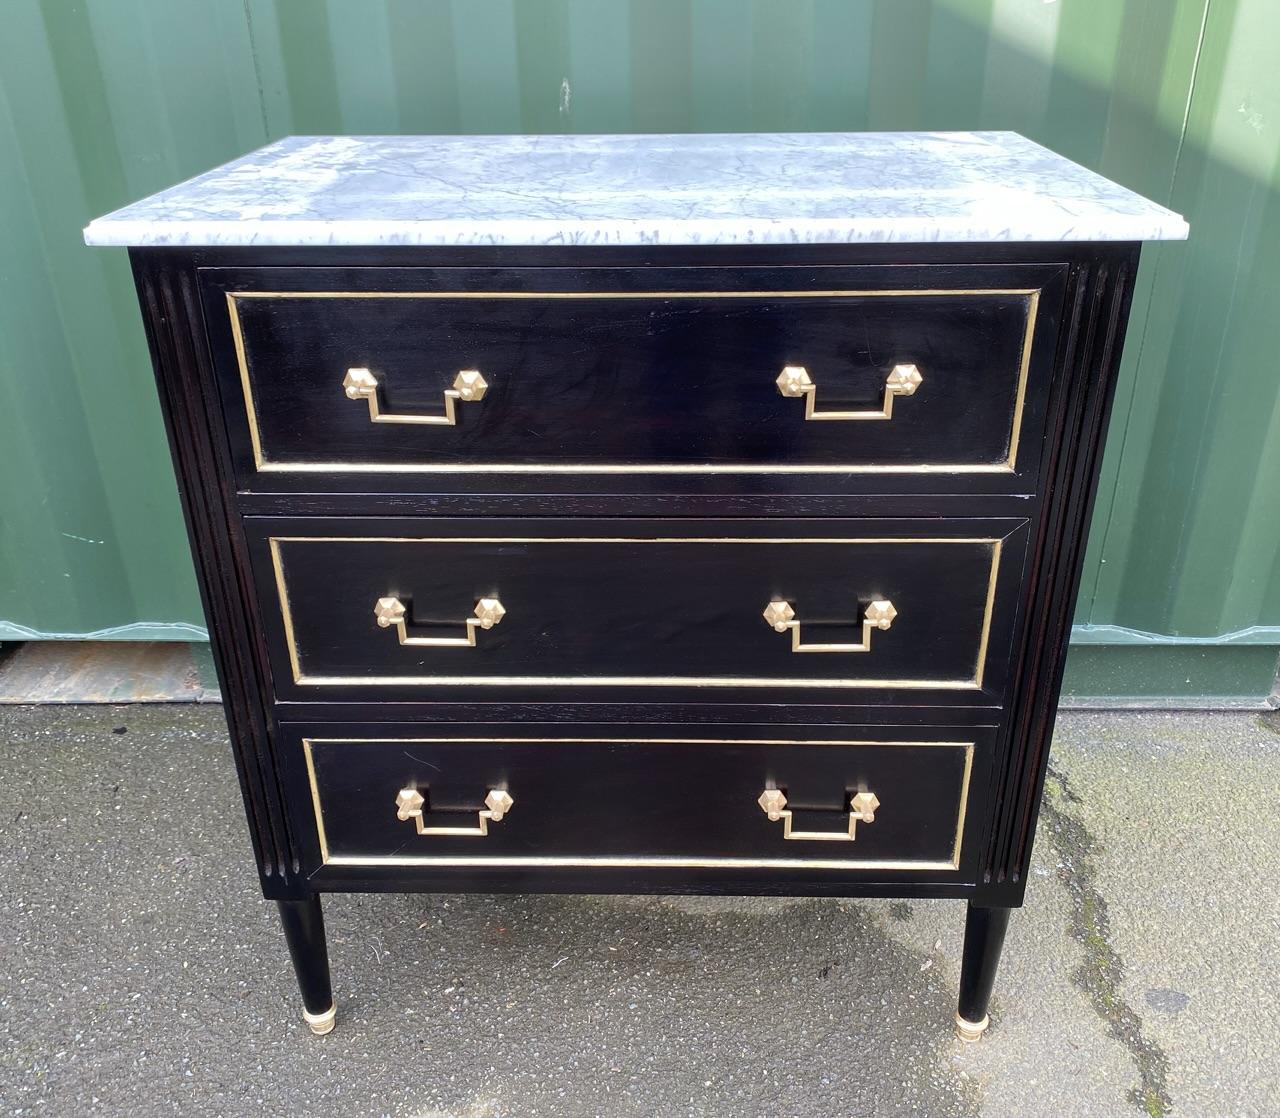 A superb quality and pretty French commode chest of drawers. ebonized with brass embellishments and brass handles. The original veined marble top is in perfect condition.
The drawers all run smoothly and this very pretty chest is offered in